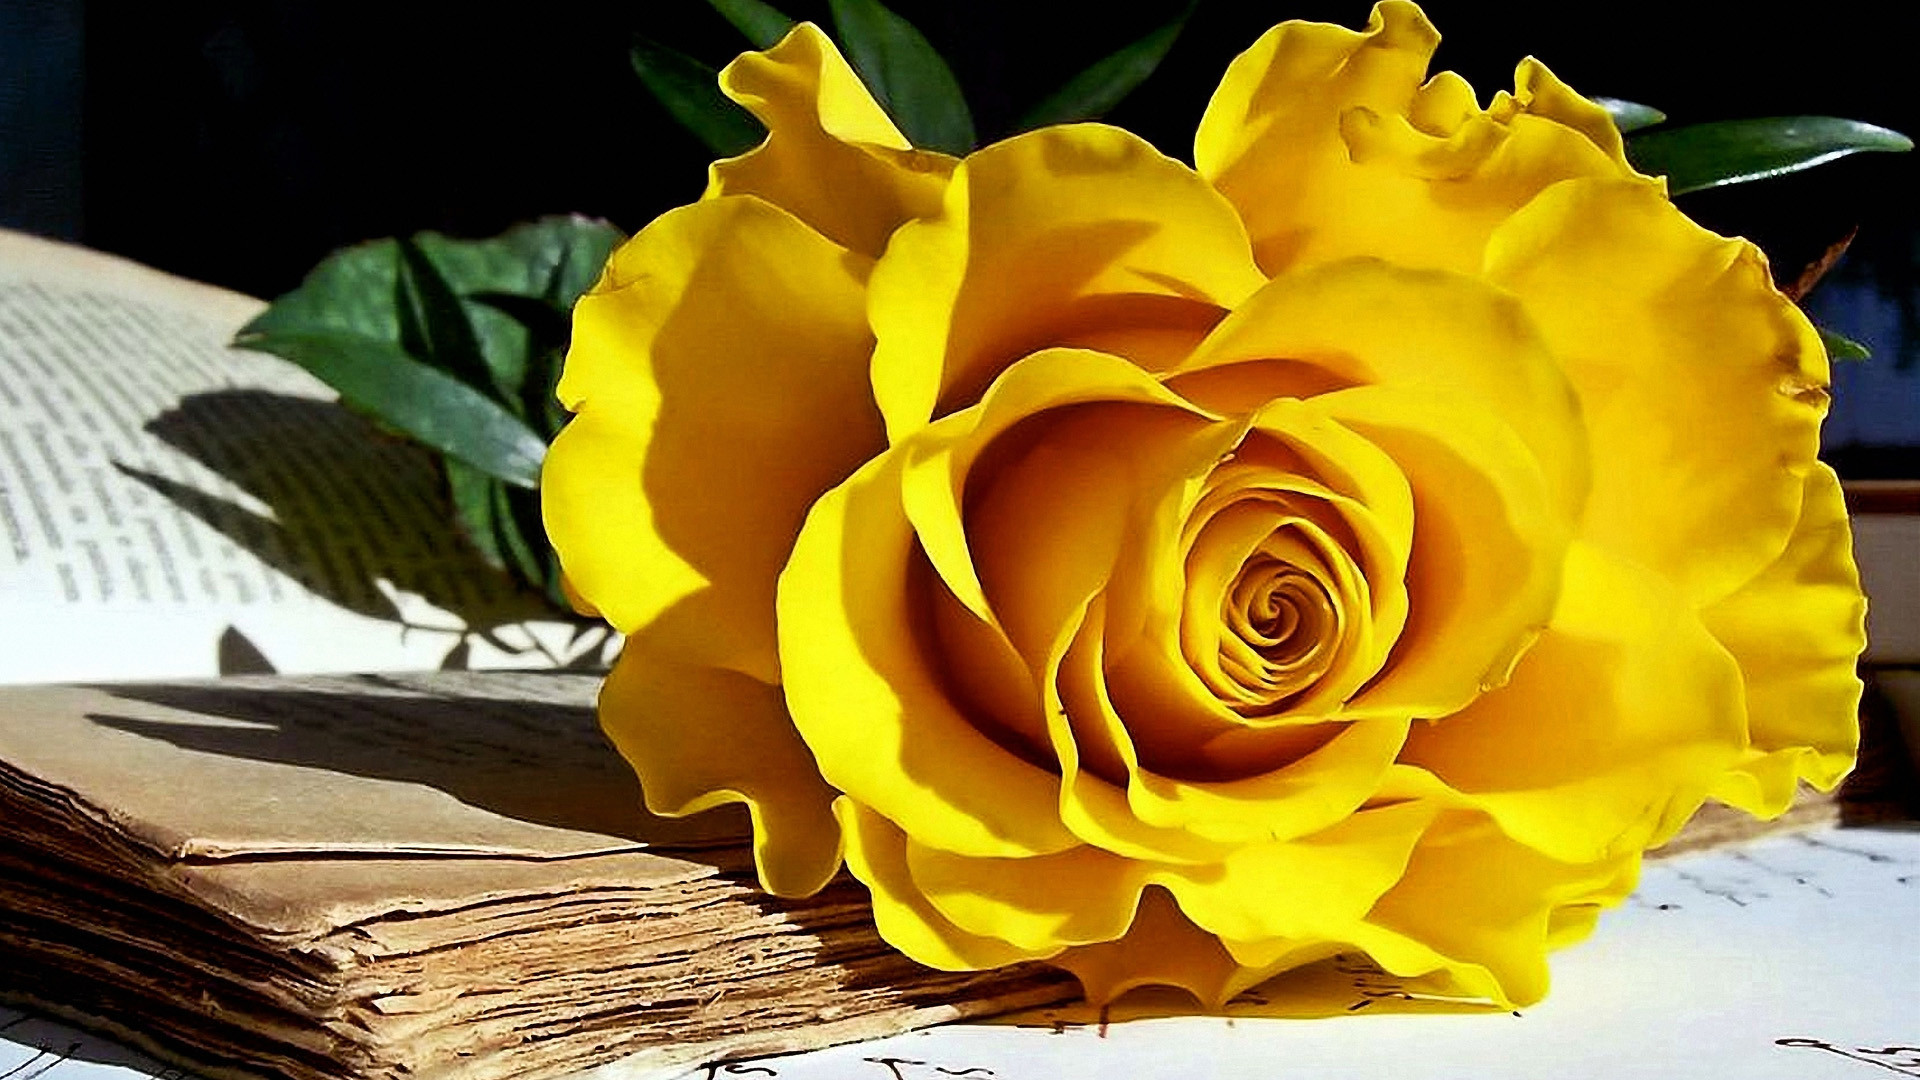 1920x1080 Yellow roses and old books wallpapers.jpg (1920Ã1080)